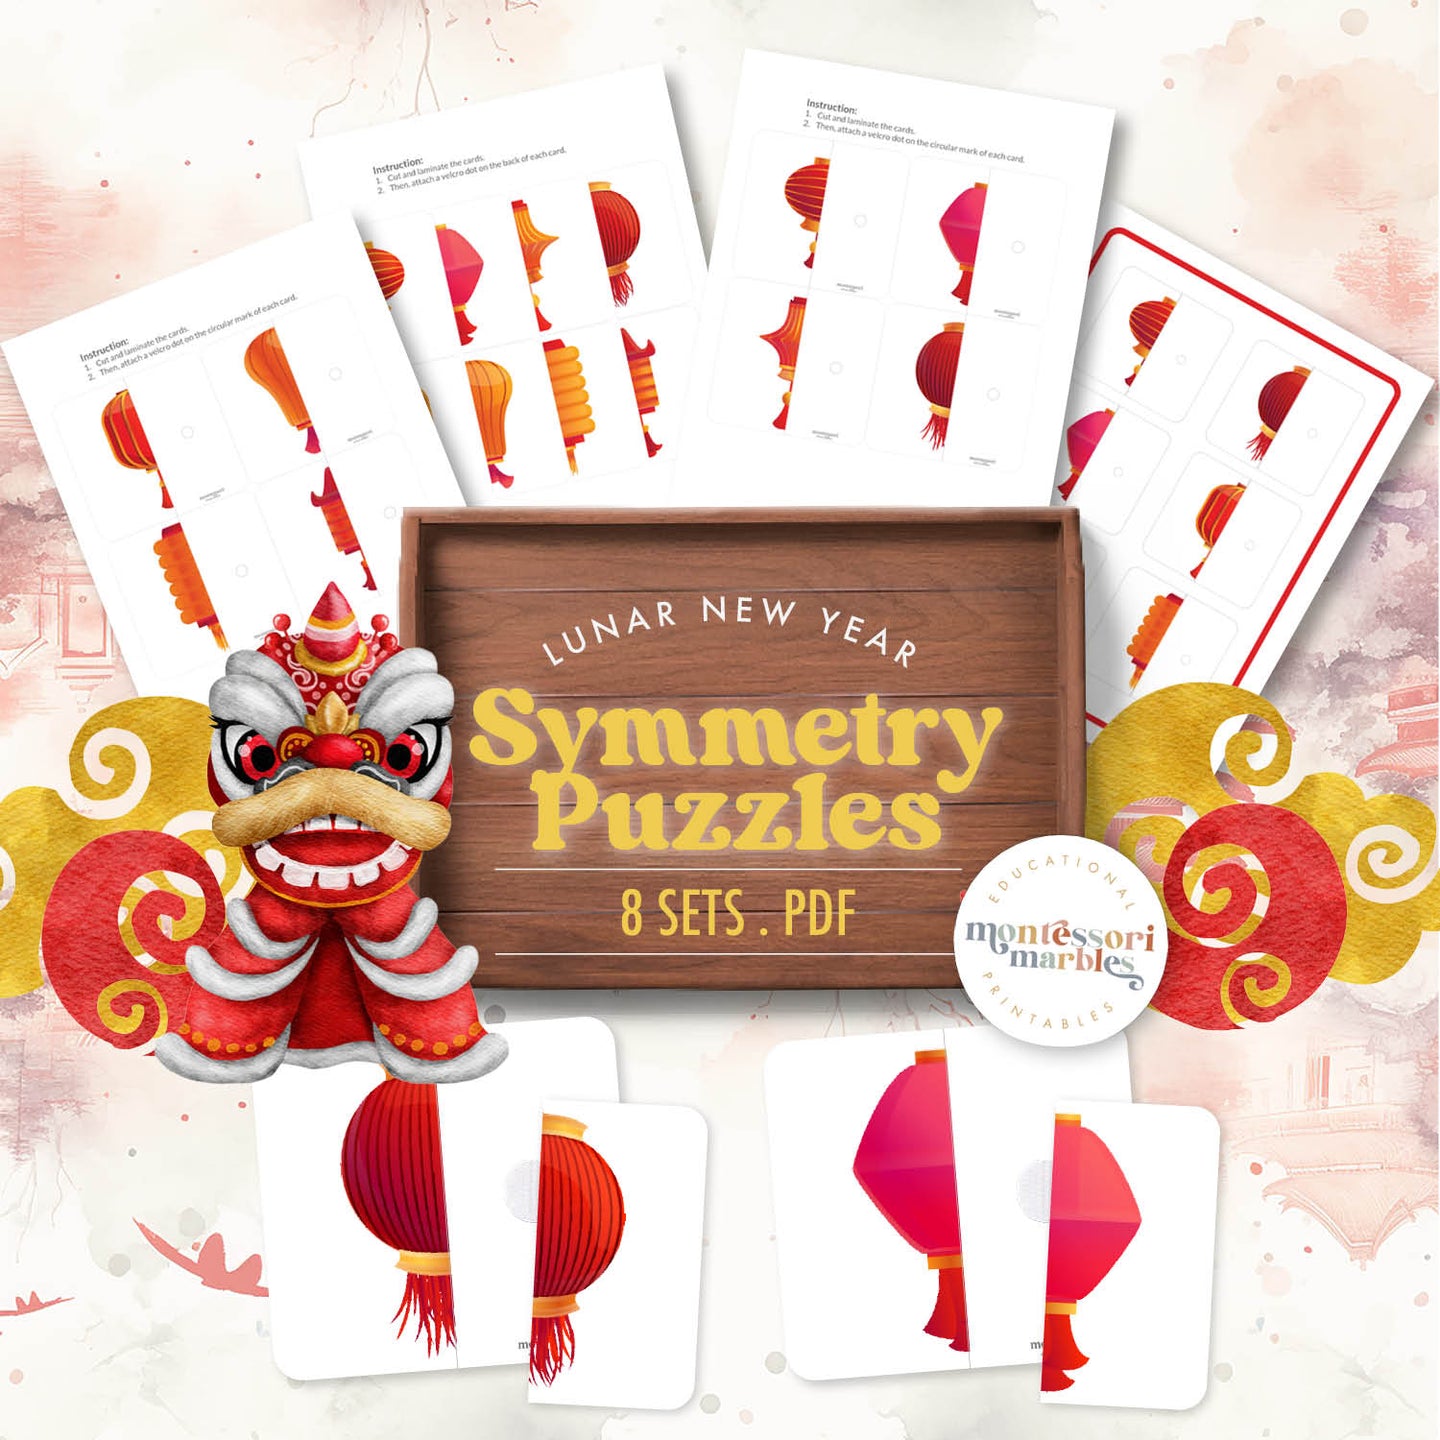 Lunar New Year Symmetry Puzzles